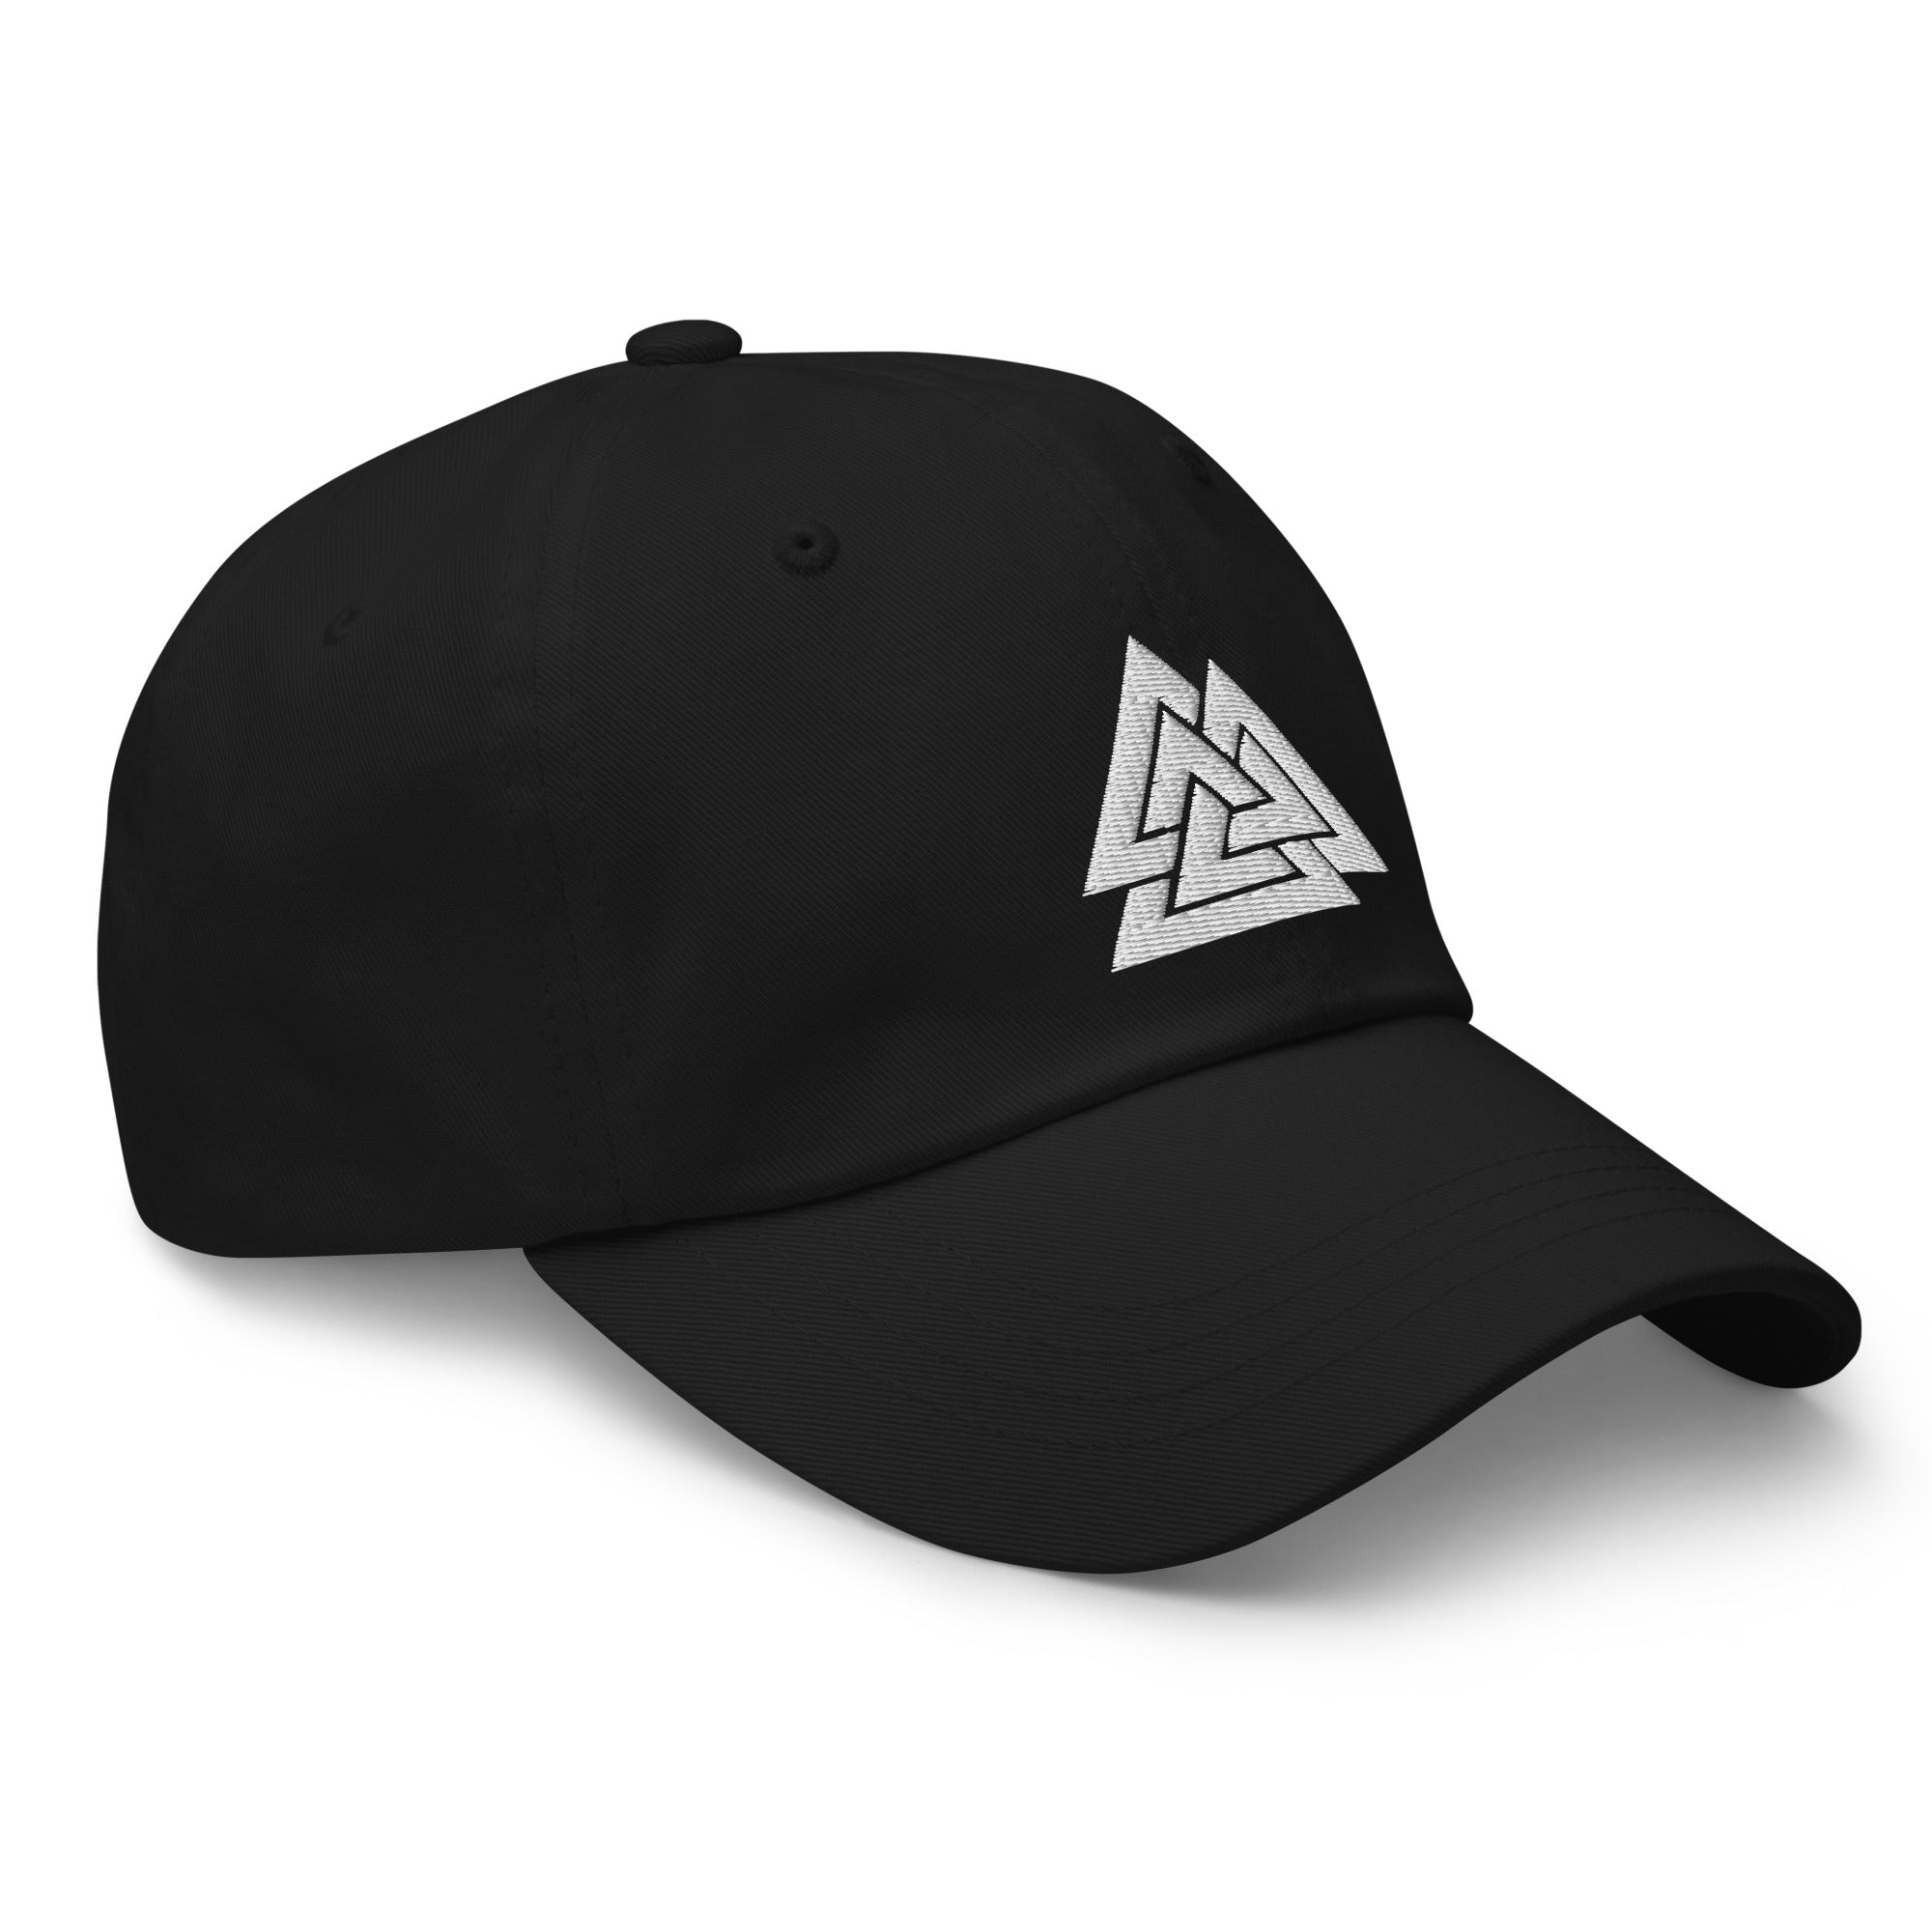 Viking Symbol Valknut Triangles of Power and Glory Embroidered Baseball Cap Dad hat - Edge of Life Designs